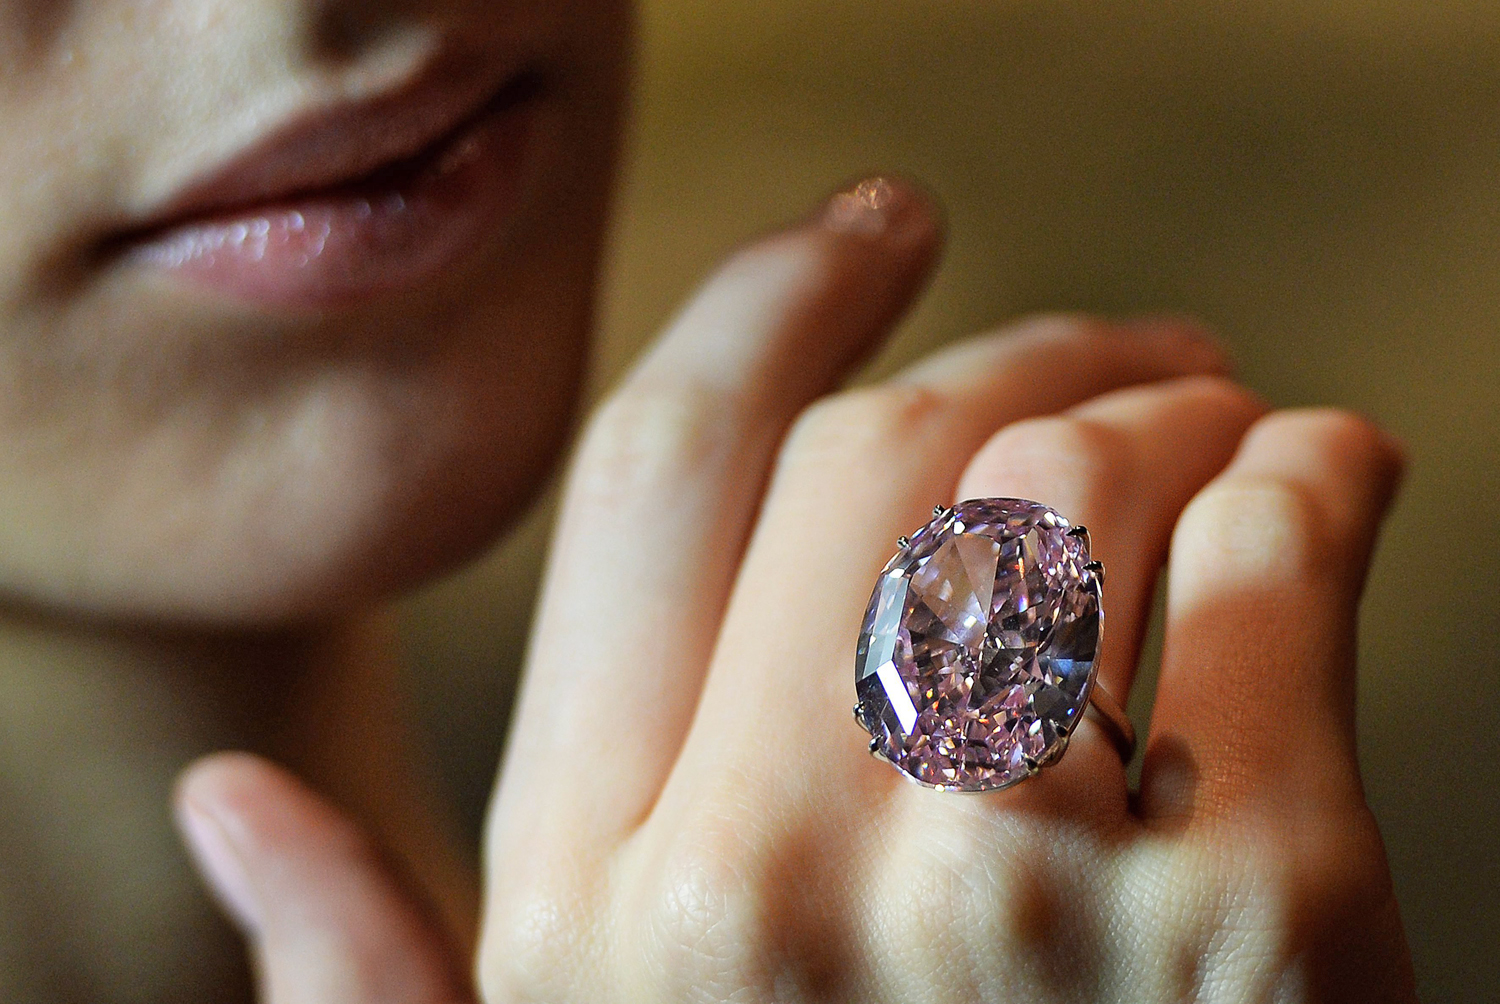 &amp;quot;Pink Star&amp;quot; diamond sells for world record $83 million at auction ...